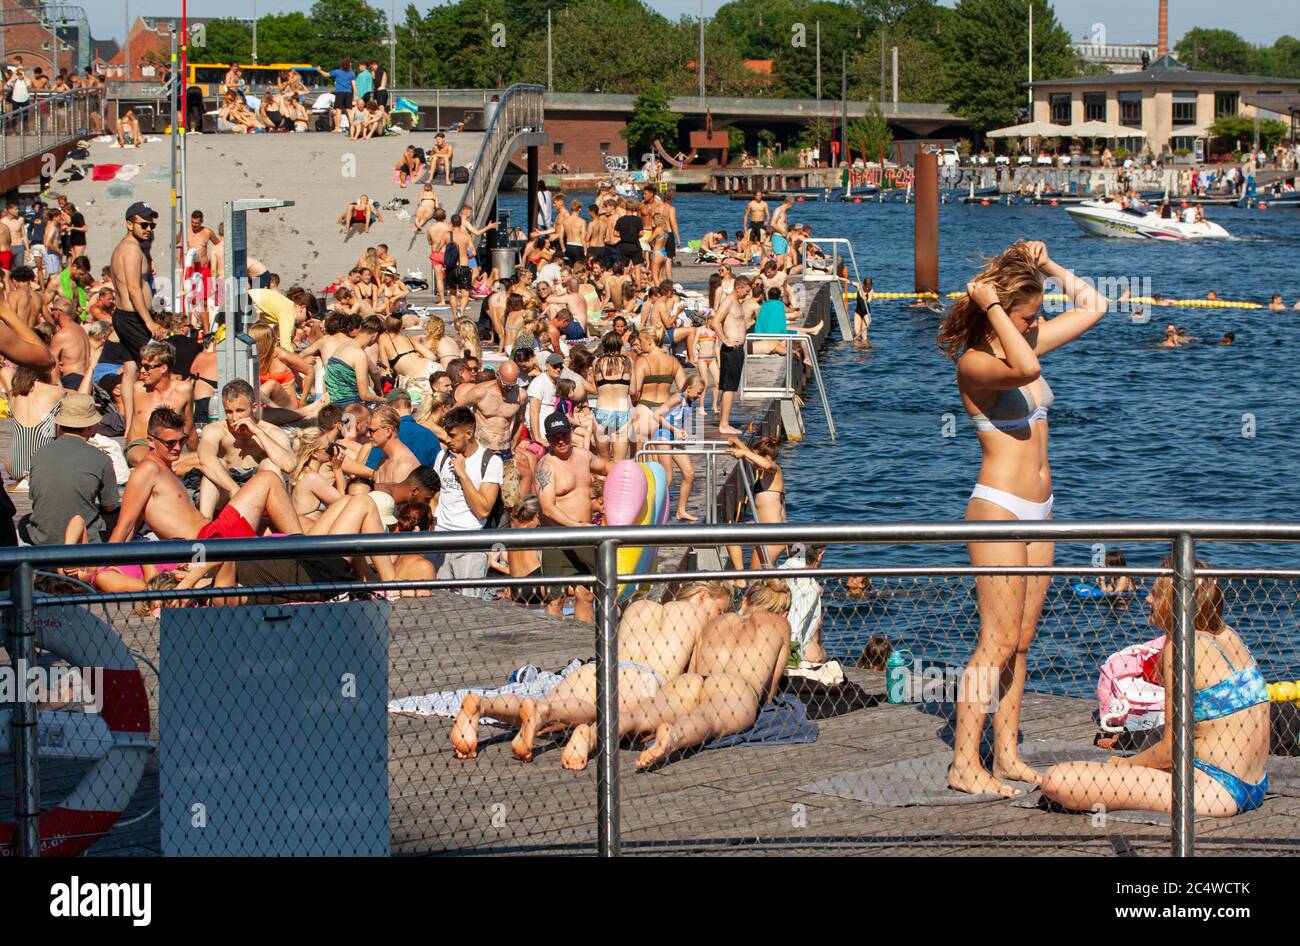 A lot of people sunbathing and bathing in water by the sea in public area  of a urban harbor. Crowded beach in sunshine. Copenhagen, Denmark - June 27  Stock Photo - Alamy